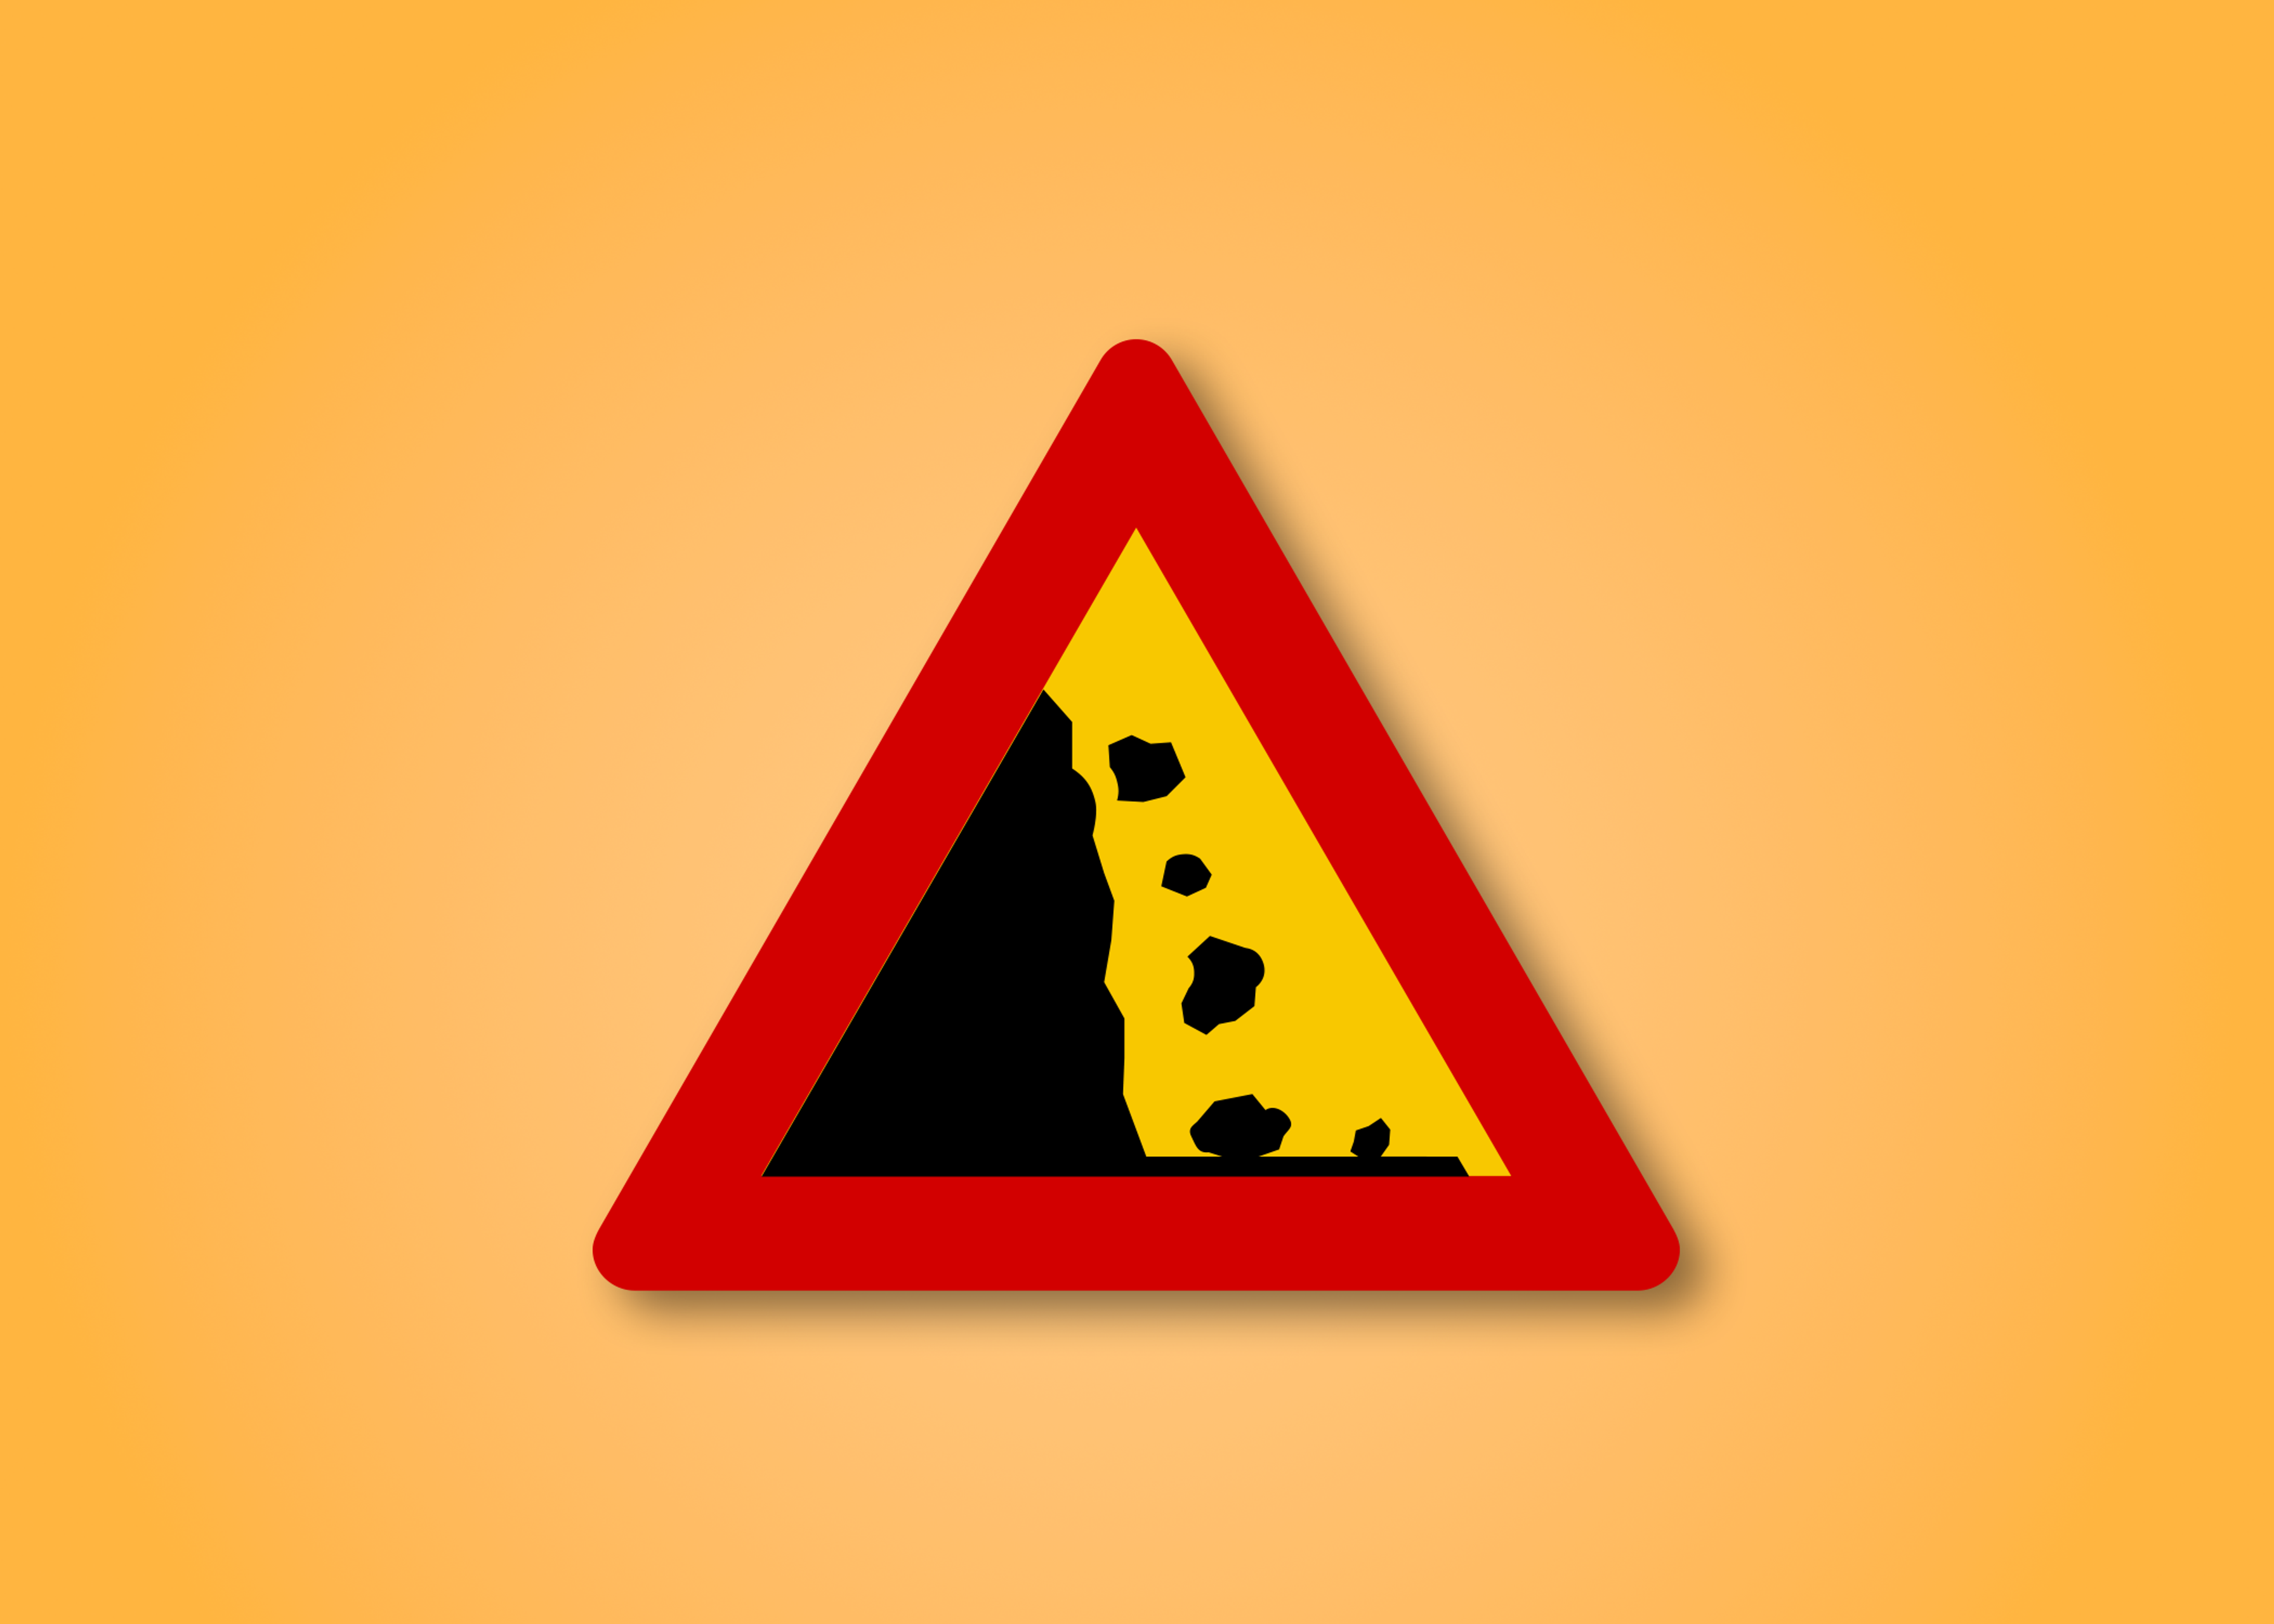 Red and yellow triangle road sign with a Falling Rocks in the middle. This road sign means Falling Rocks ahead